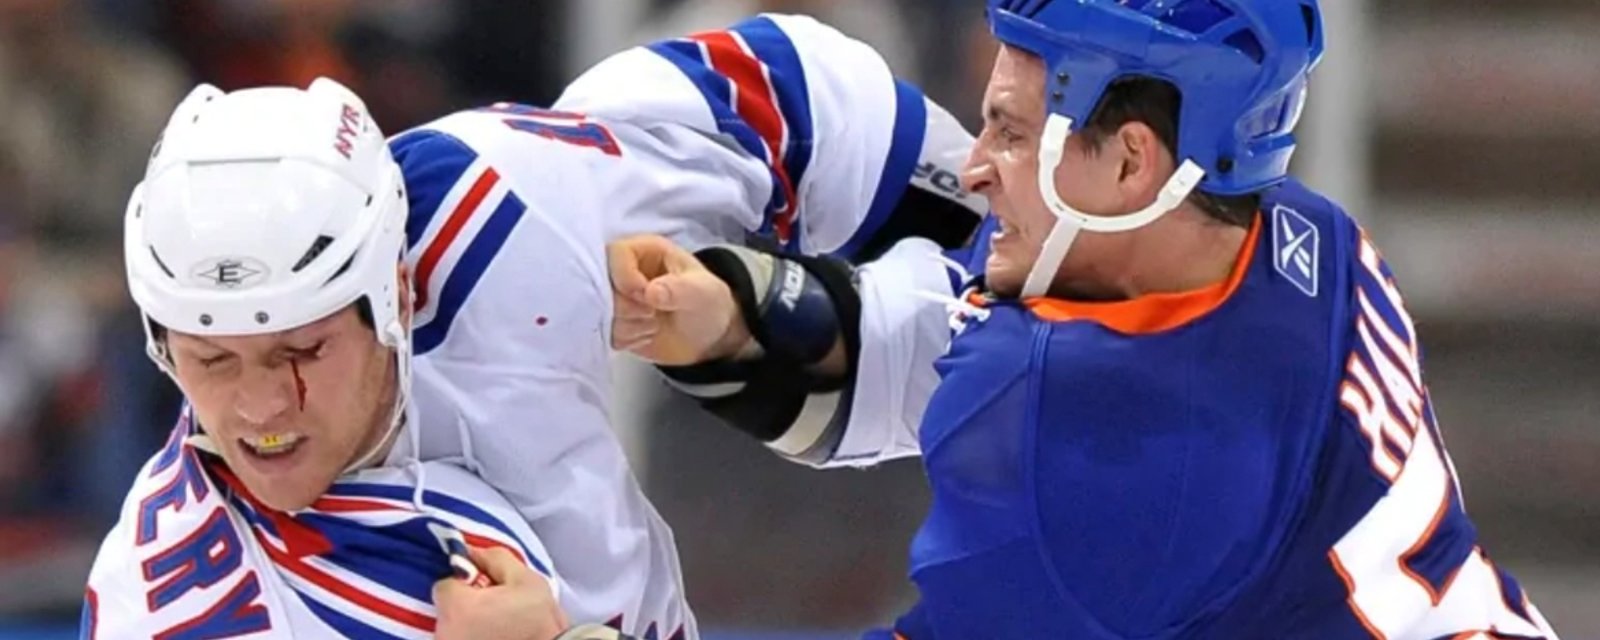 Sean Avery doubles down on Islanders hate, goes off in epic rant